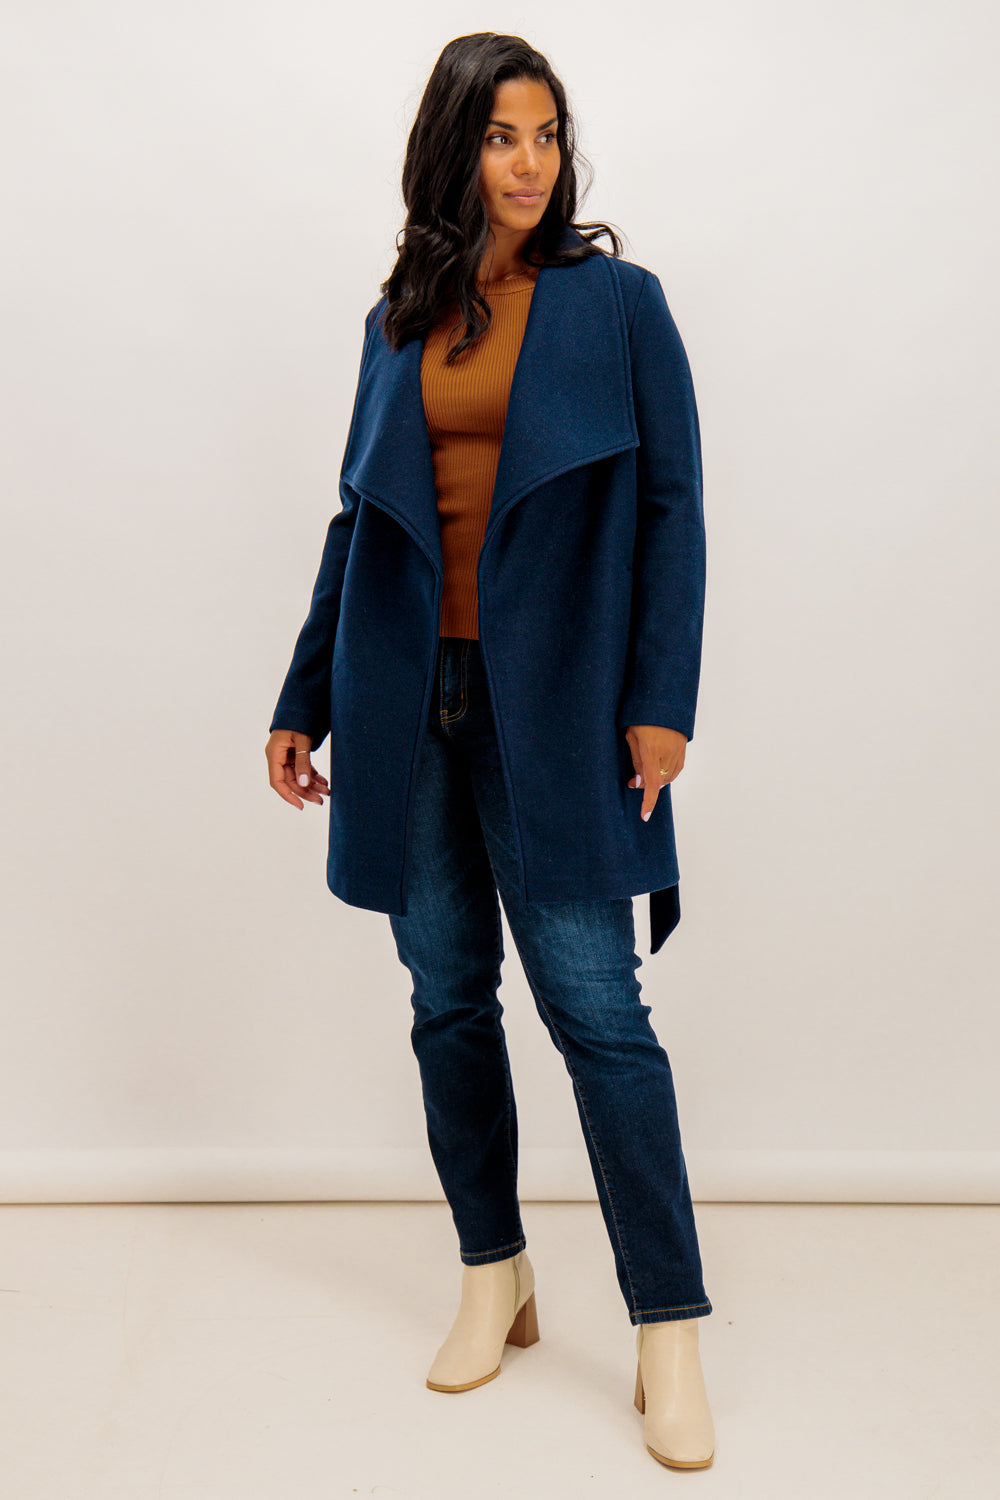 Cooley Navy Collar Belted Coat